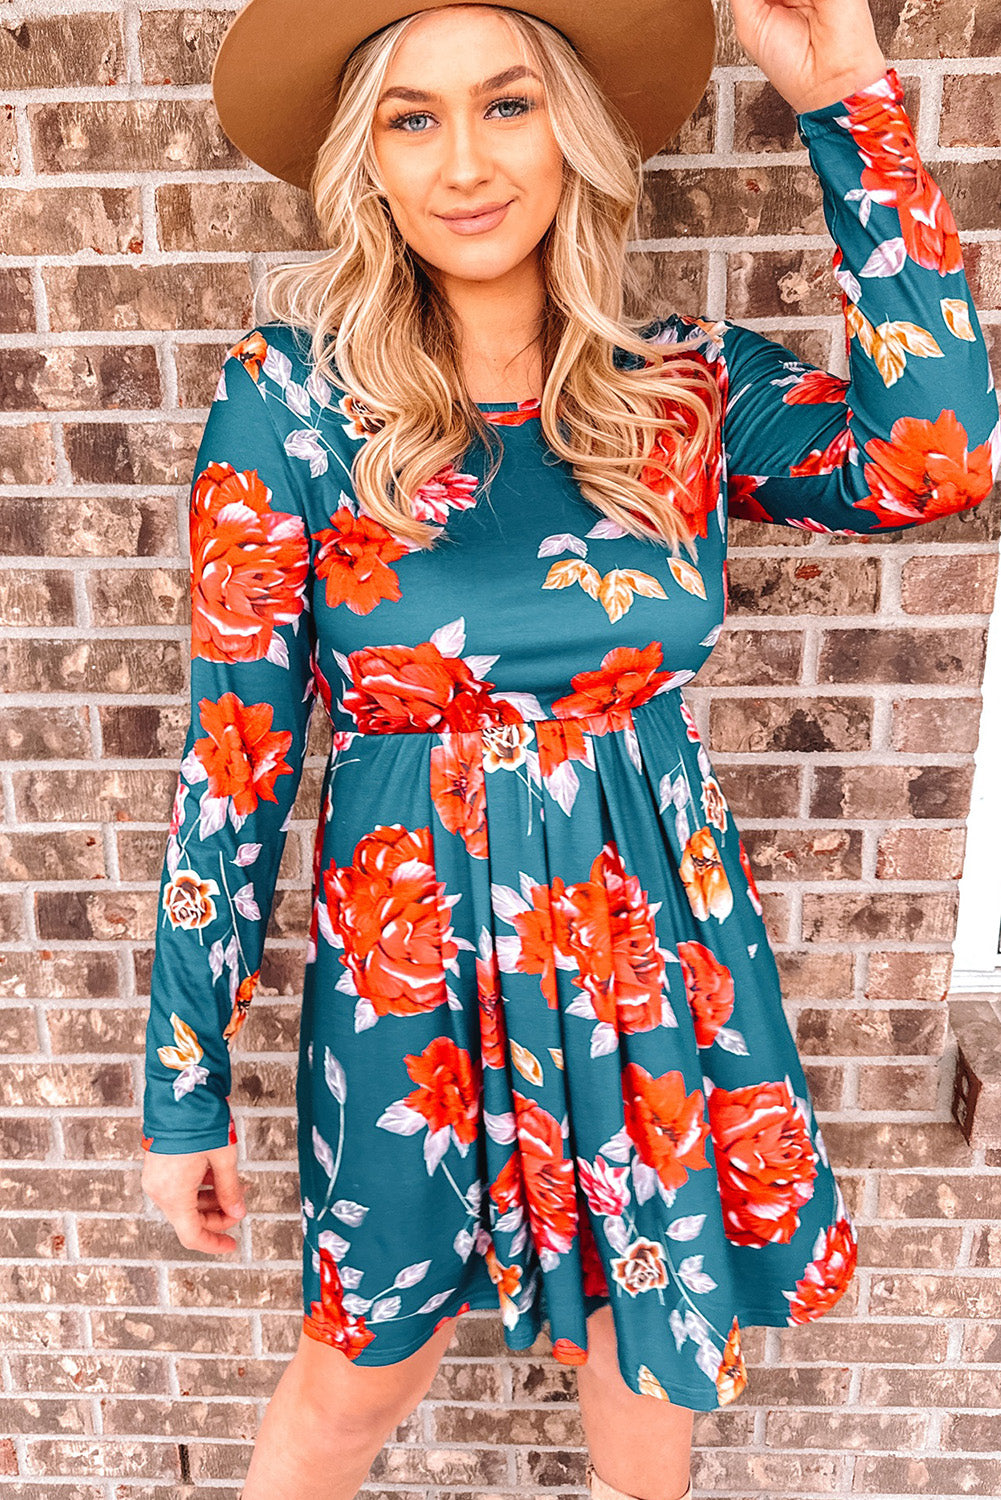 All About The Floral Dress